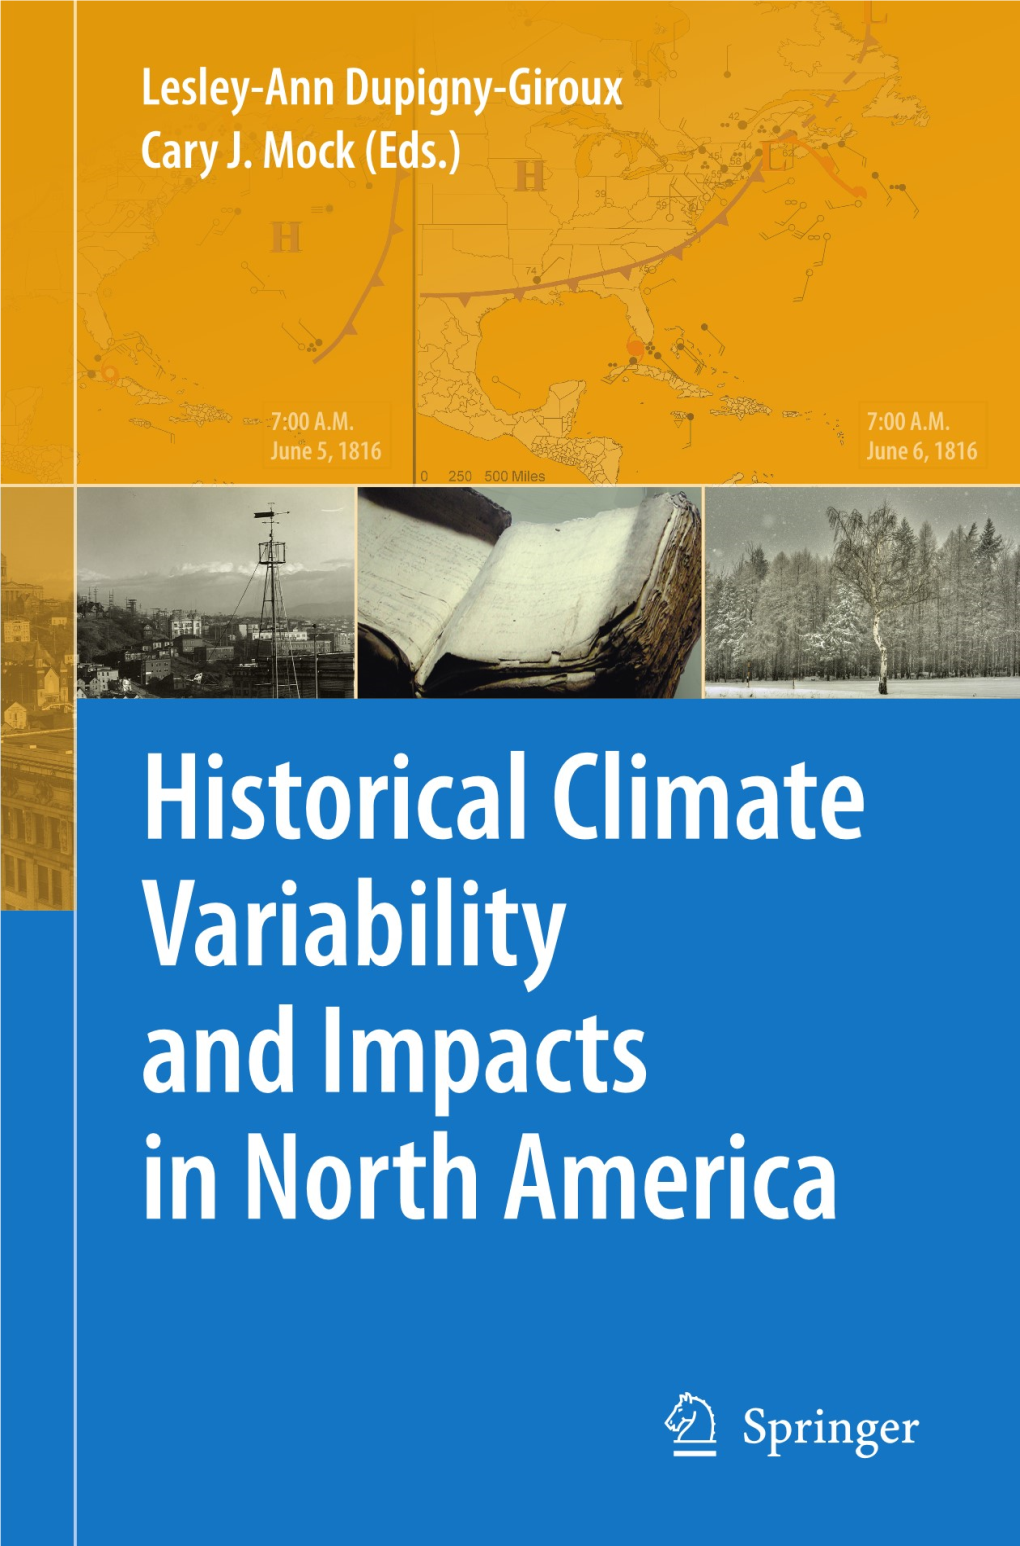 Weather Station History and Introduced Variability in Climate Data